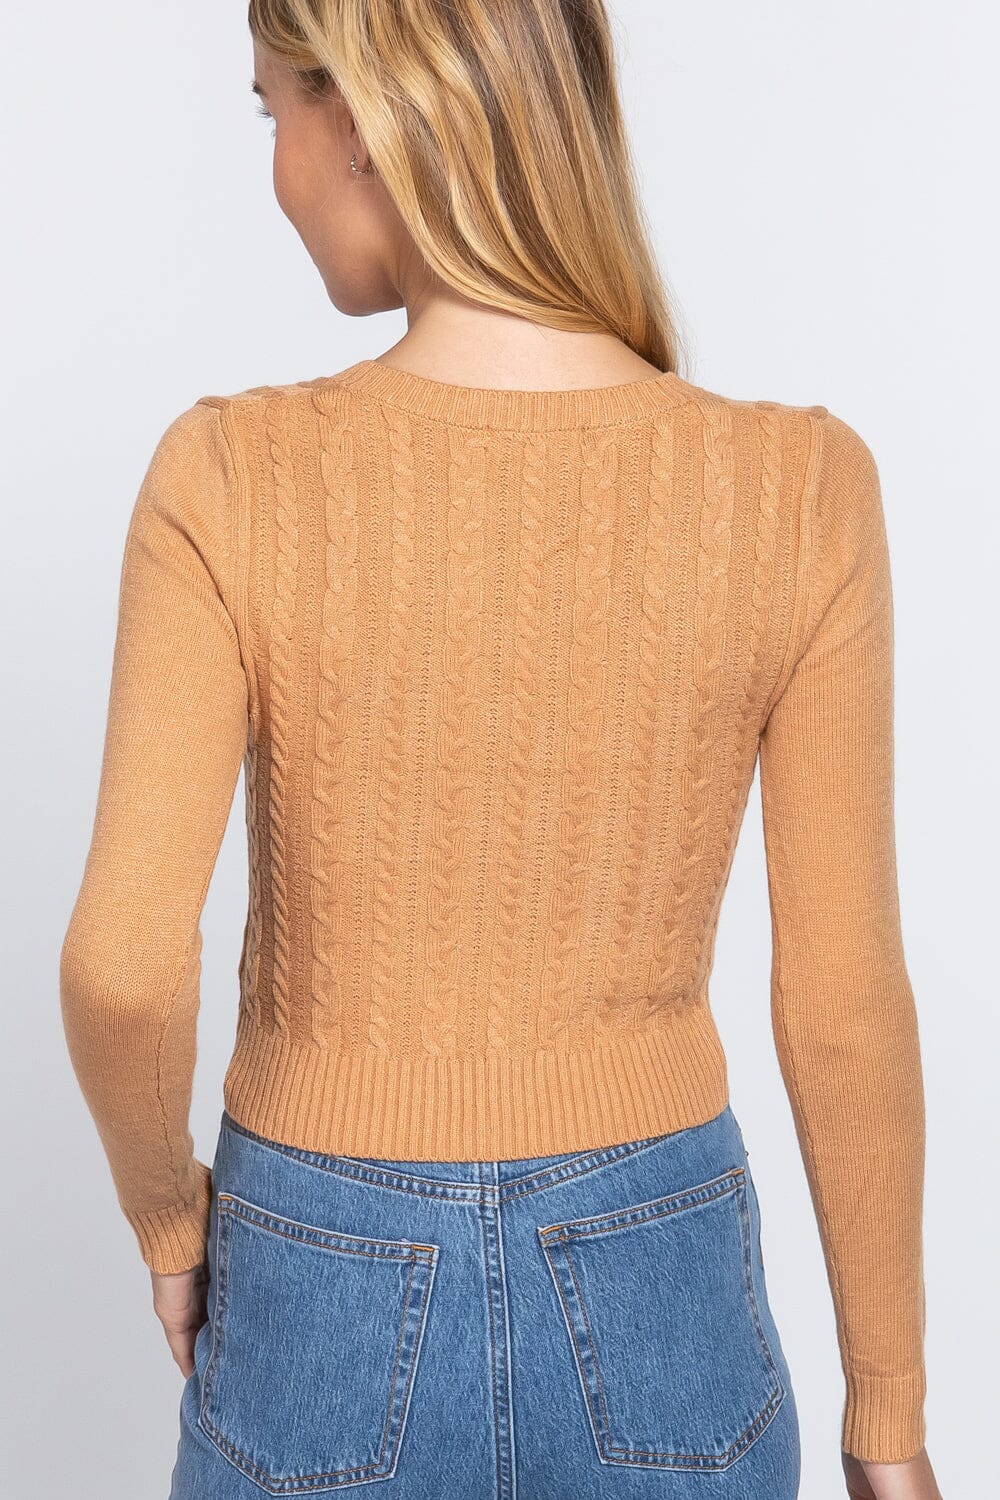 HoneyComb Yellow Long Sleeve V-neck Cable Crop Sweater Shirts & Tops jehouze 